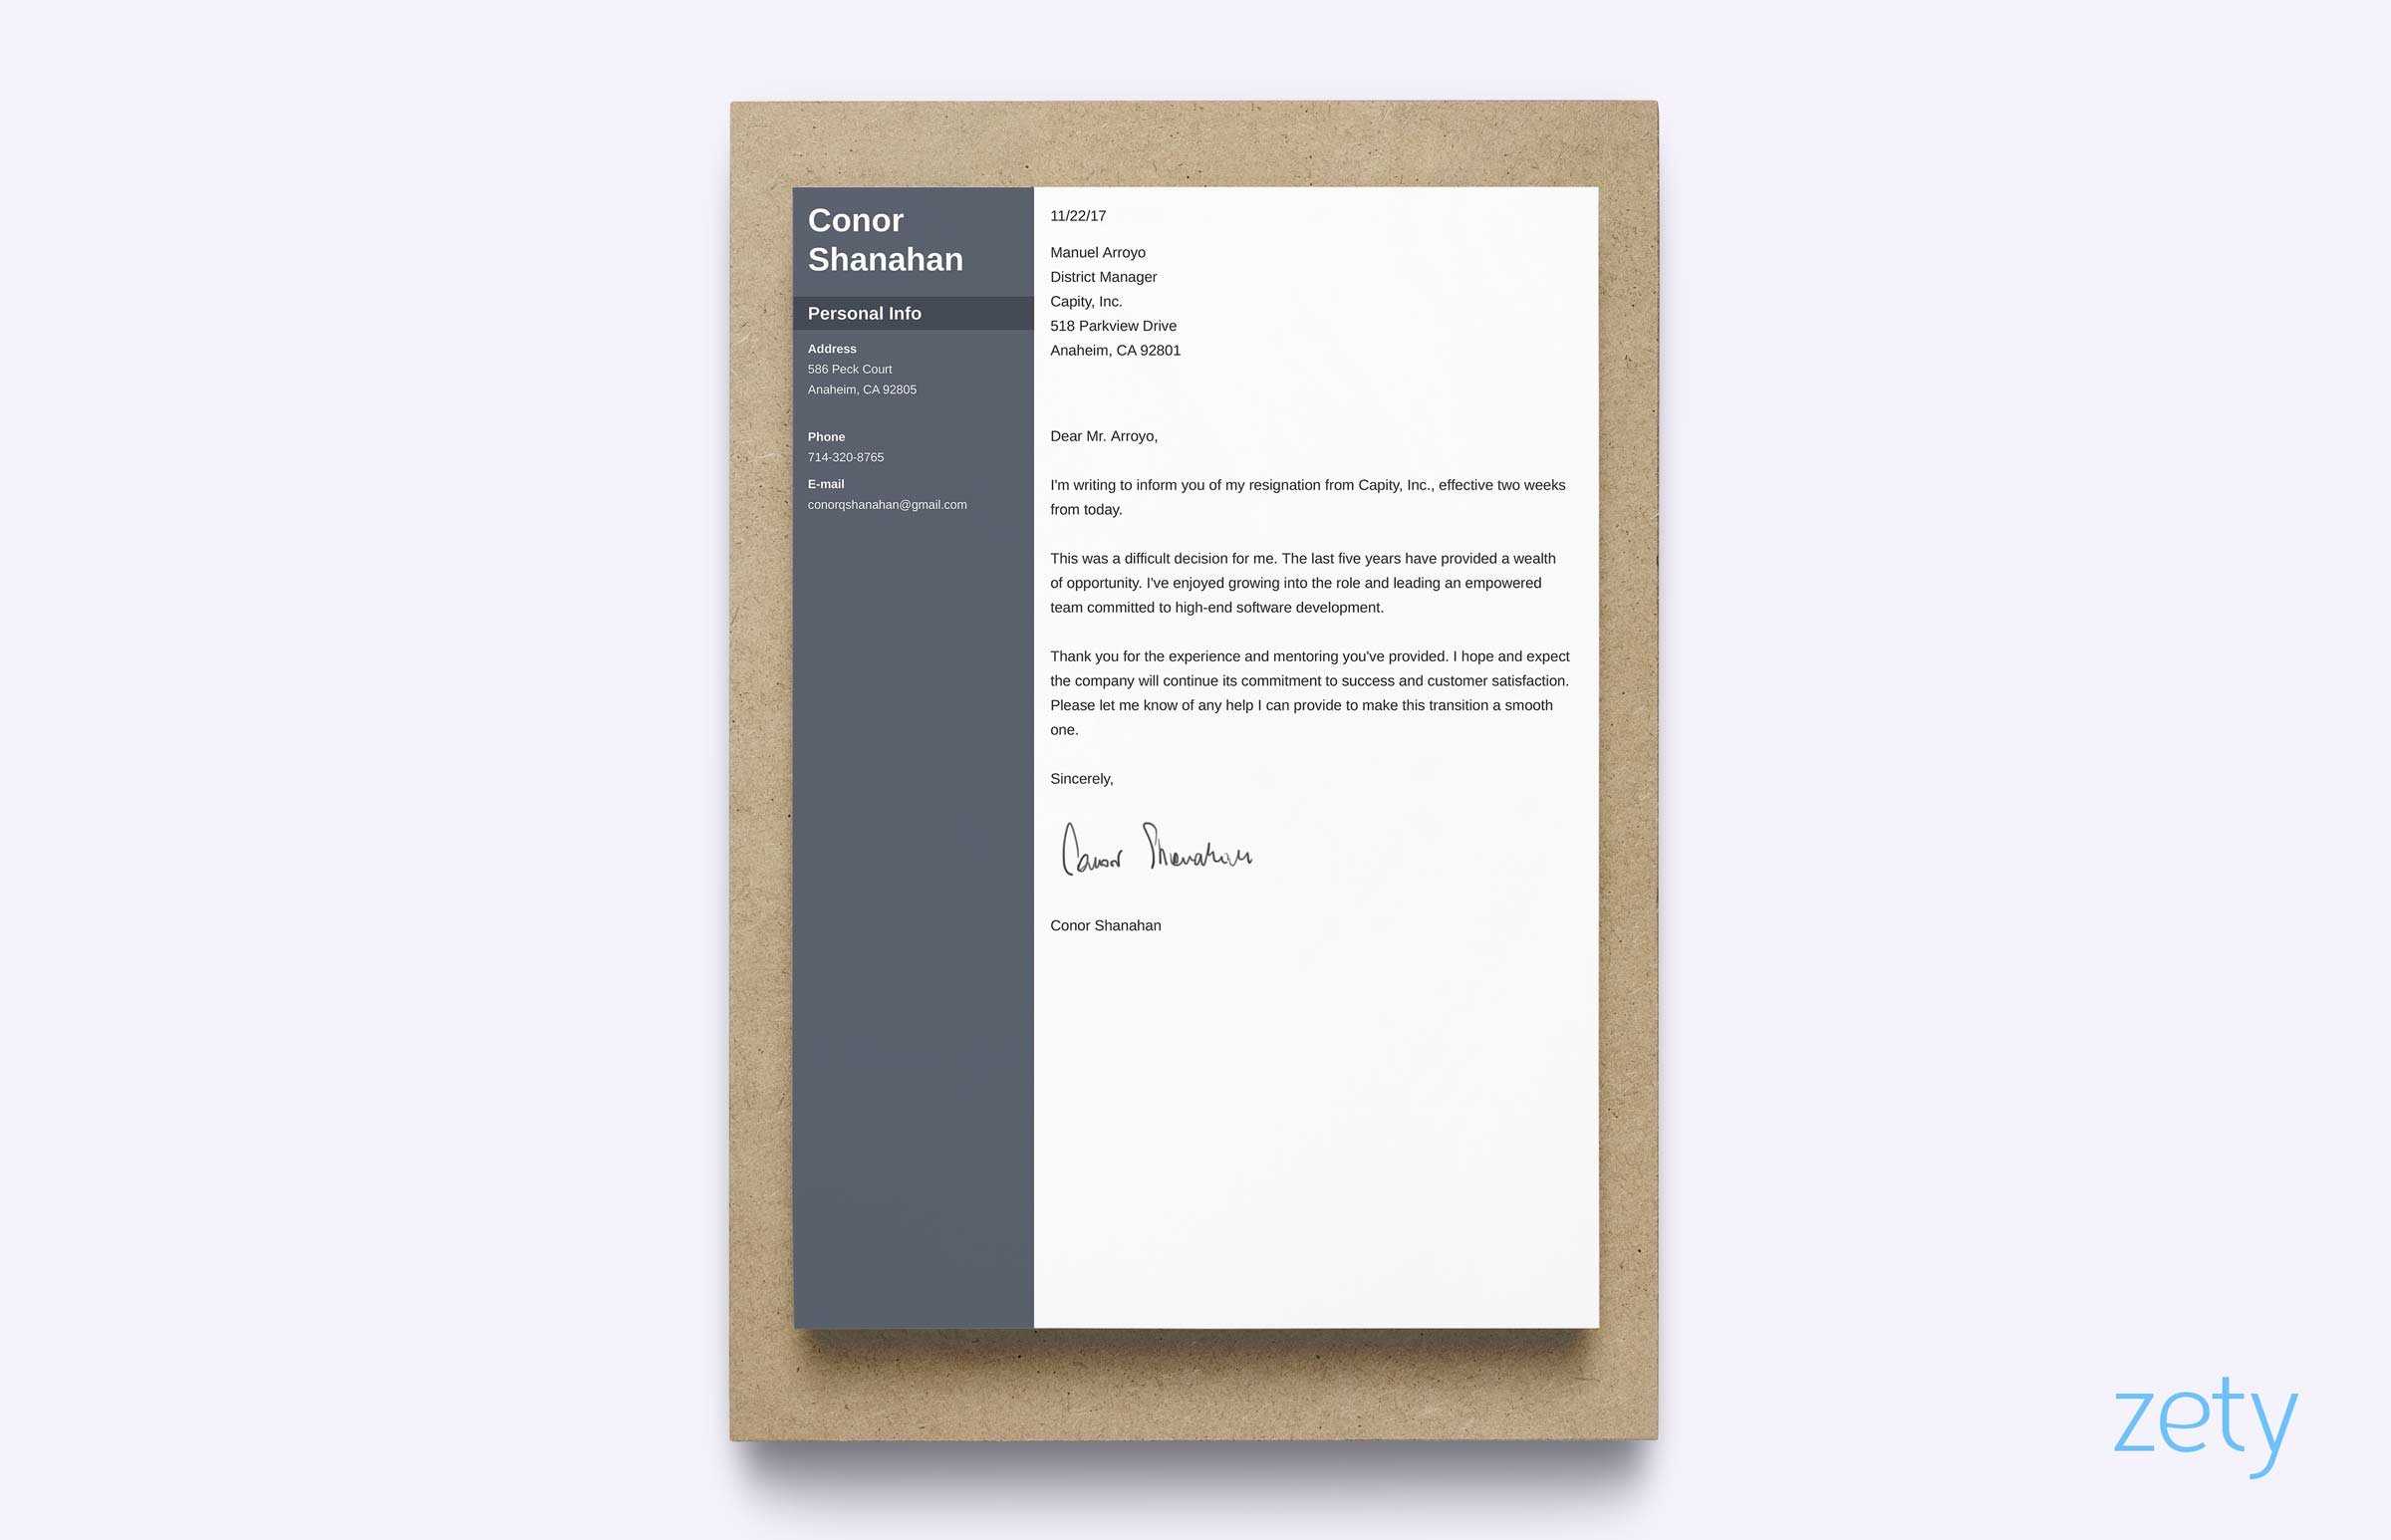 Two Weeks Notice Letter (Template And Writing Guide) With 2 Weeks Notice Template Word